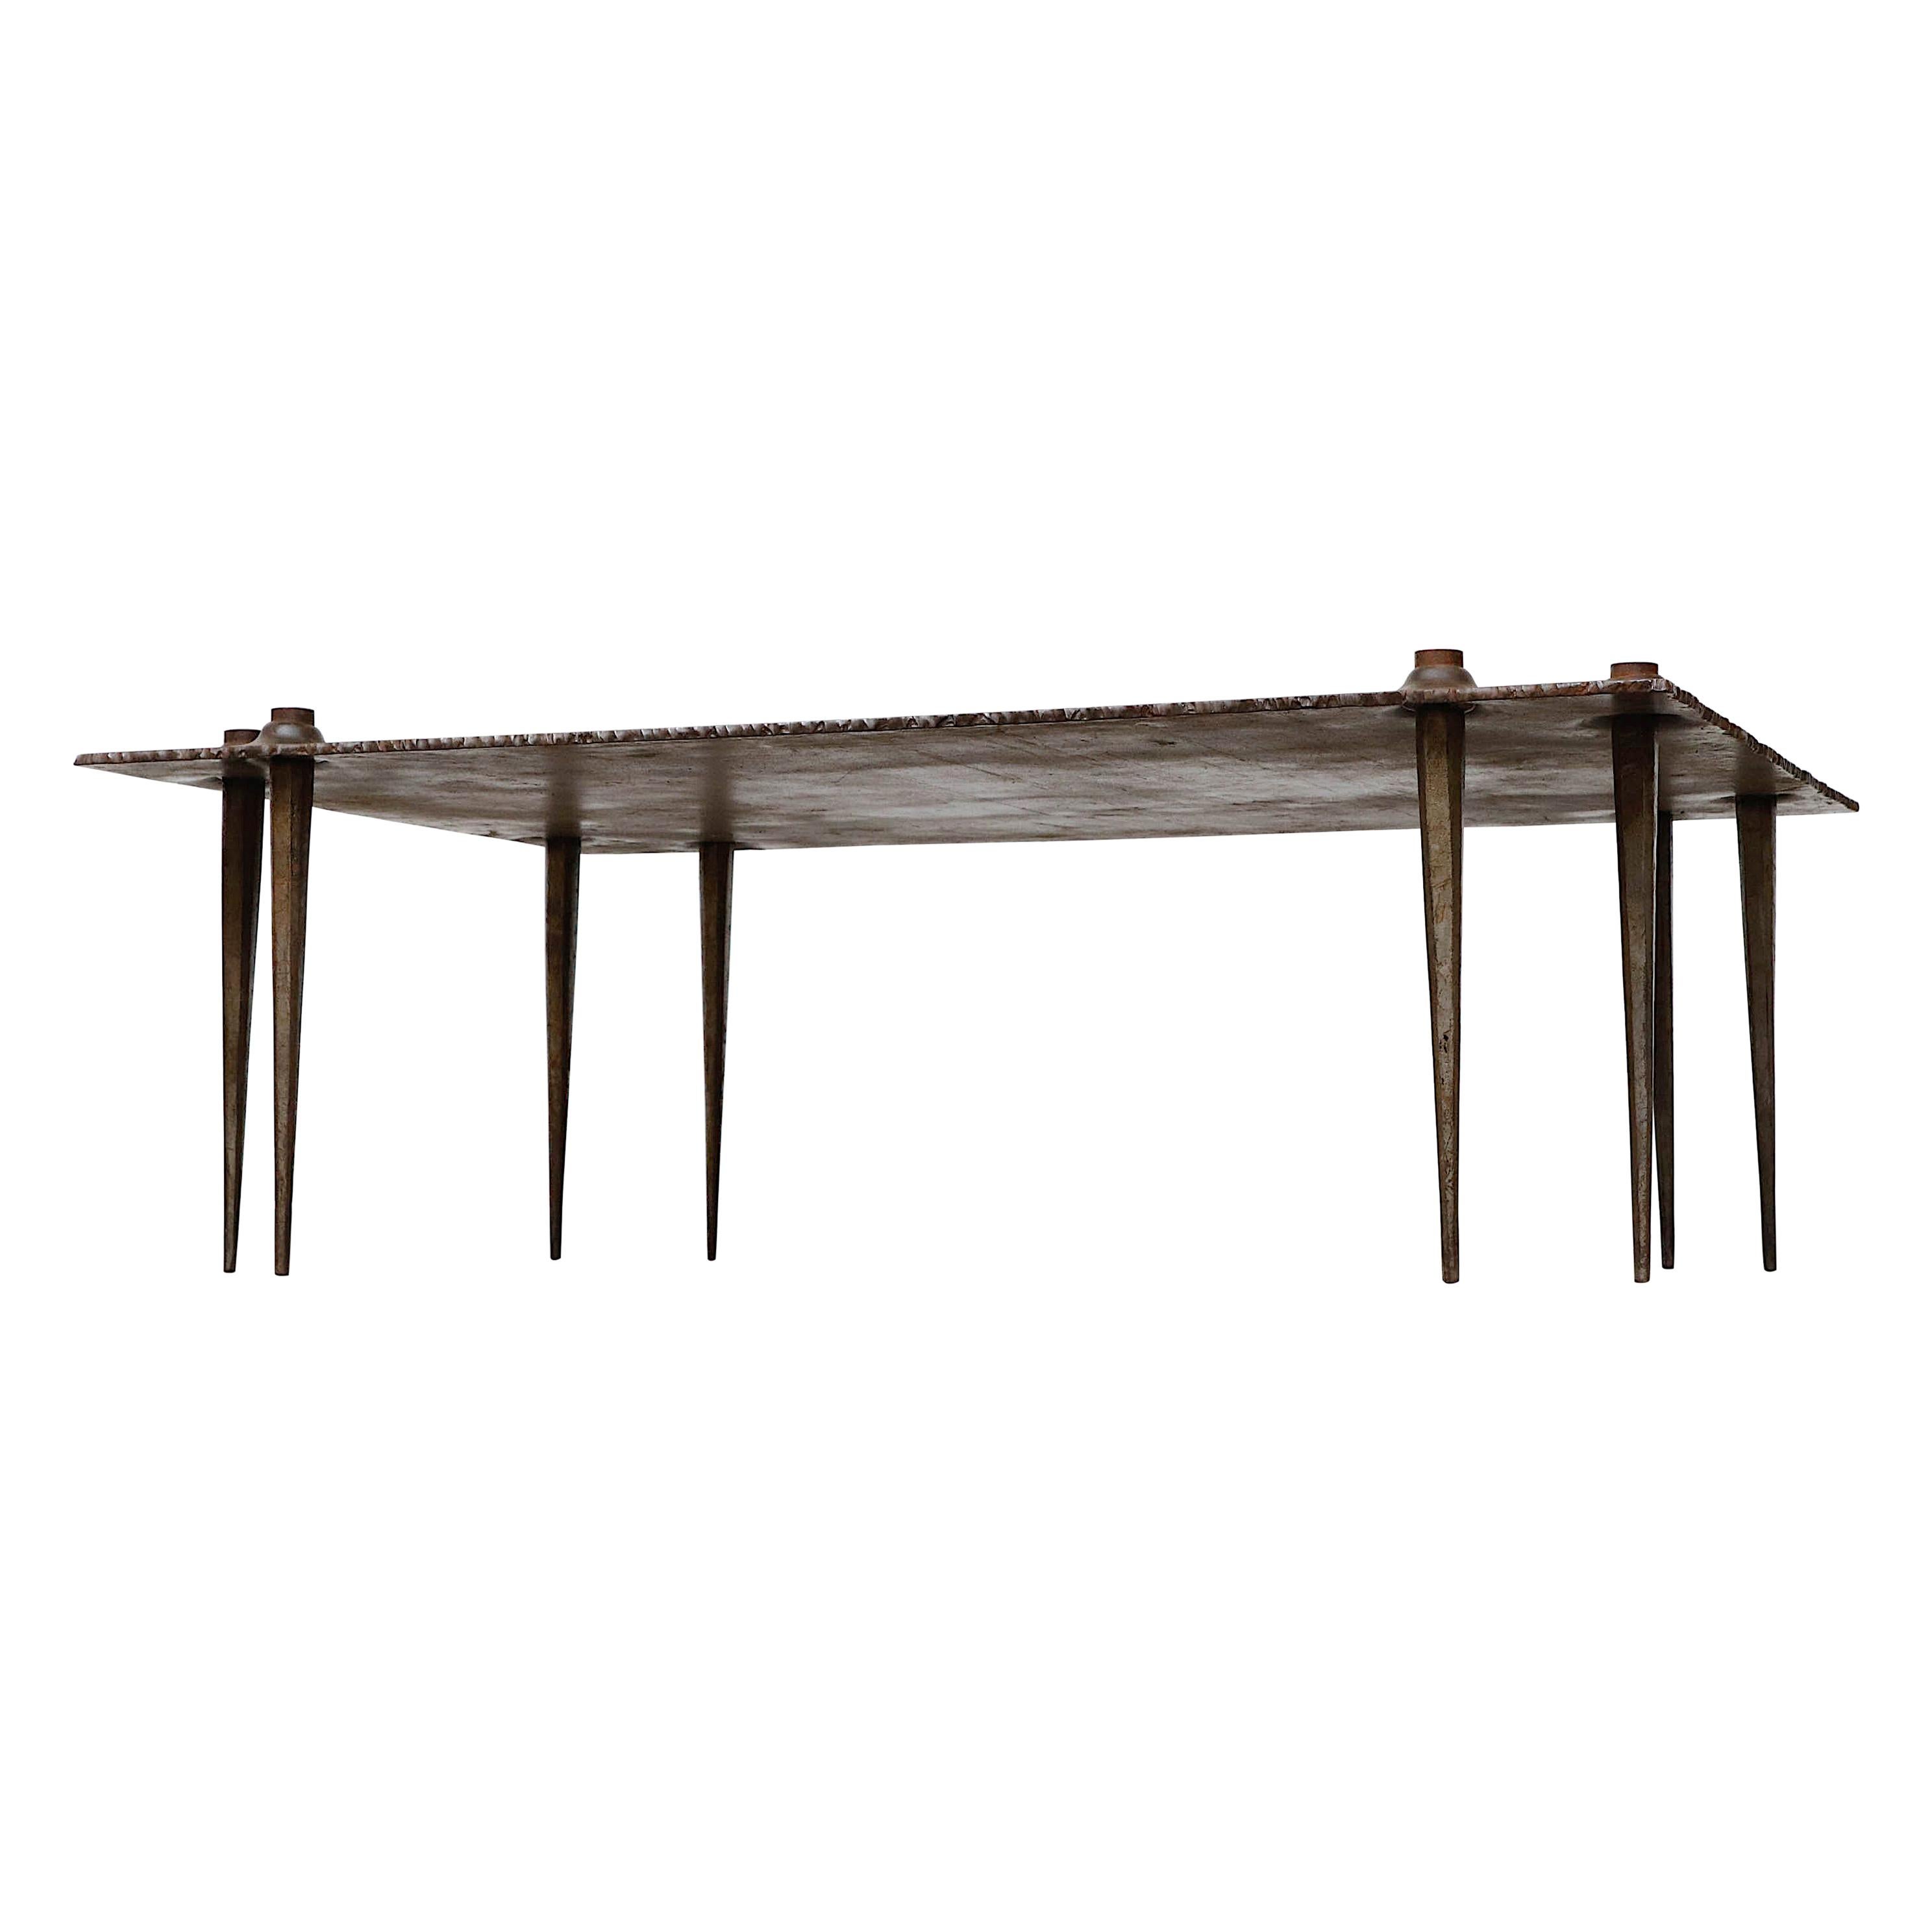 Famed design by the late Idir Mecibah (1958-2013) for Smederij Moerman, 1998. Brutalist rectangle coffee table. In original condition. One more table available, listed separately (LU922422664712). Most of his Mecibah's work is not being produced